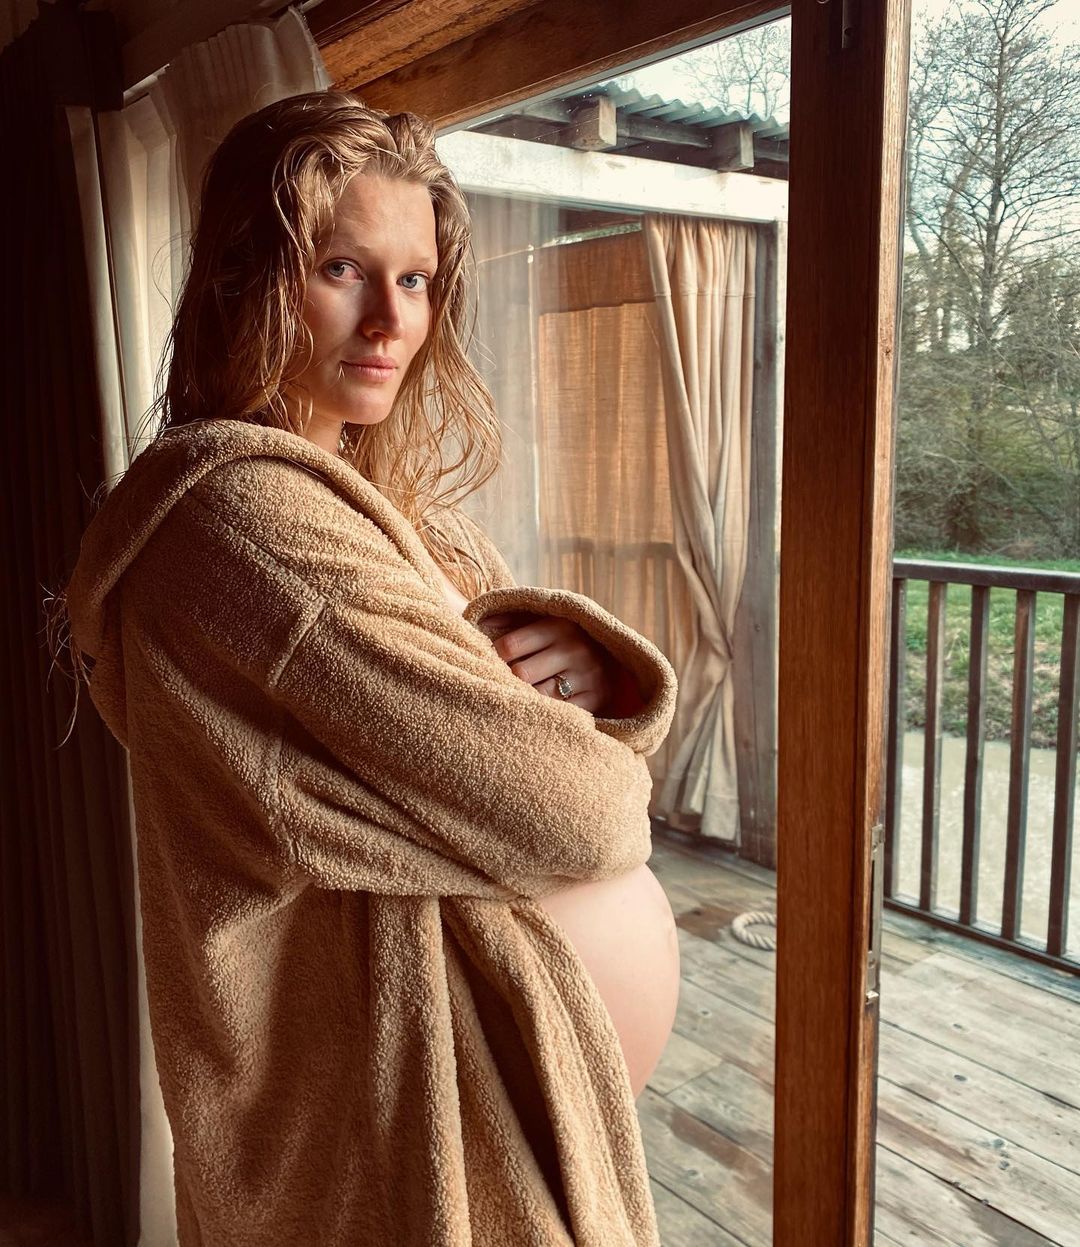 Celebrities Posing Nude While Pregnant Maternity Pics photo